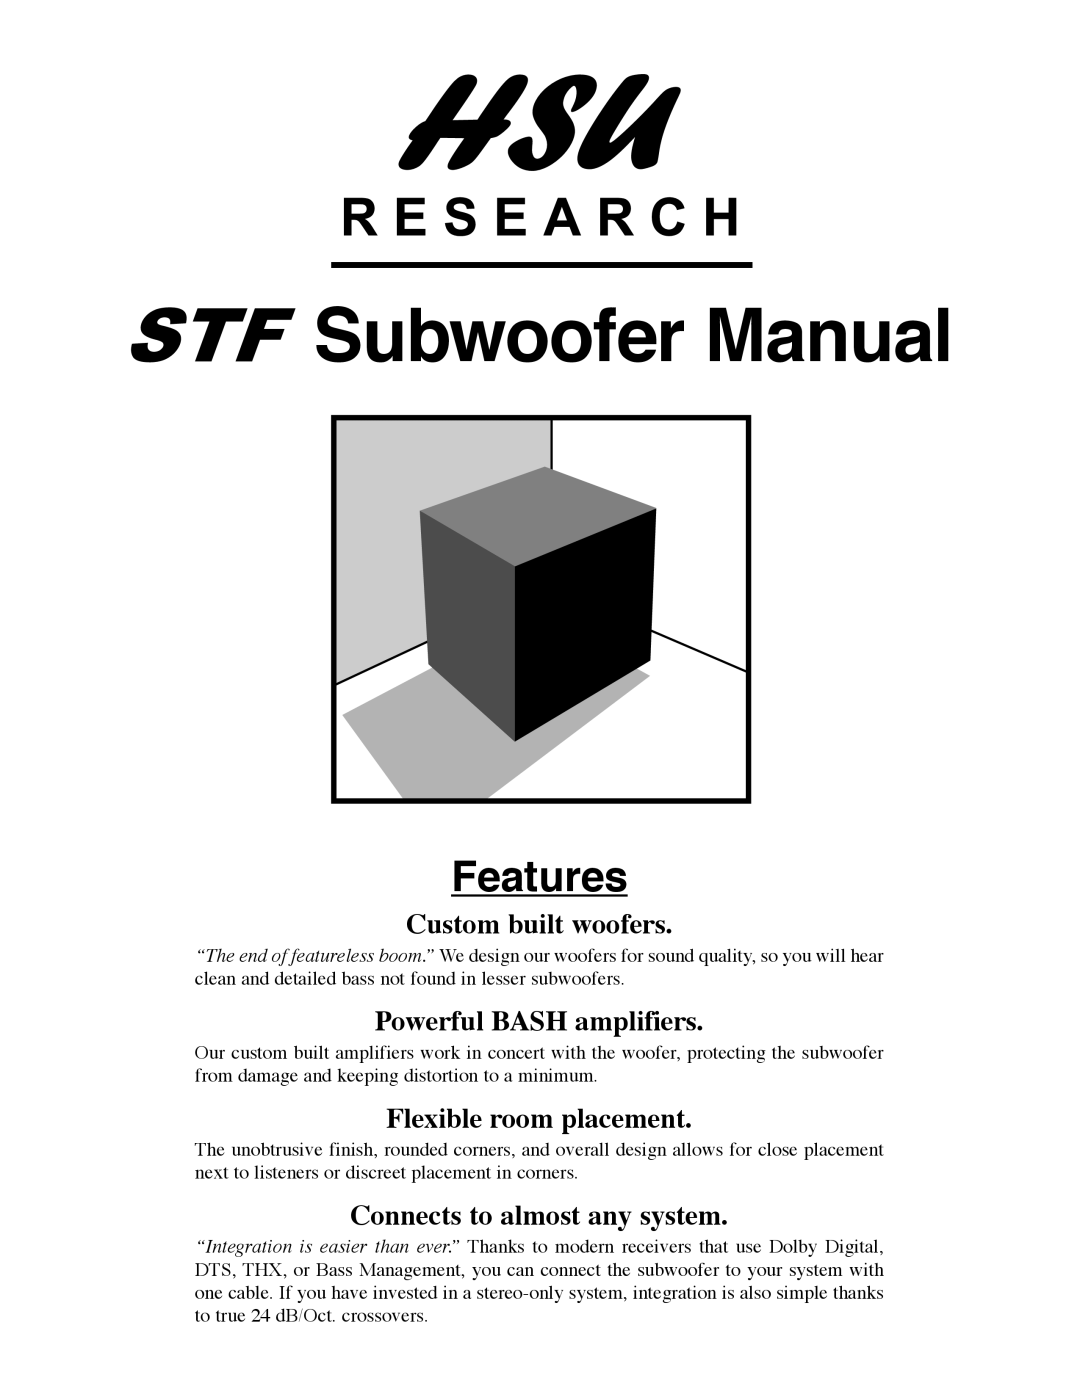 Hsu Research STF manual Subwoofer Manual, Features, Custom built woofers, Powerful BASH amplifiers 